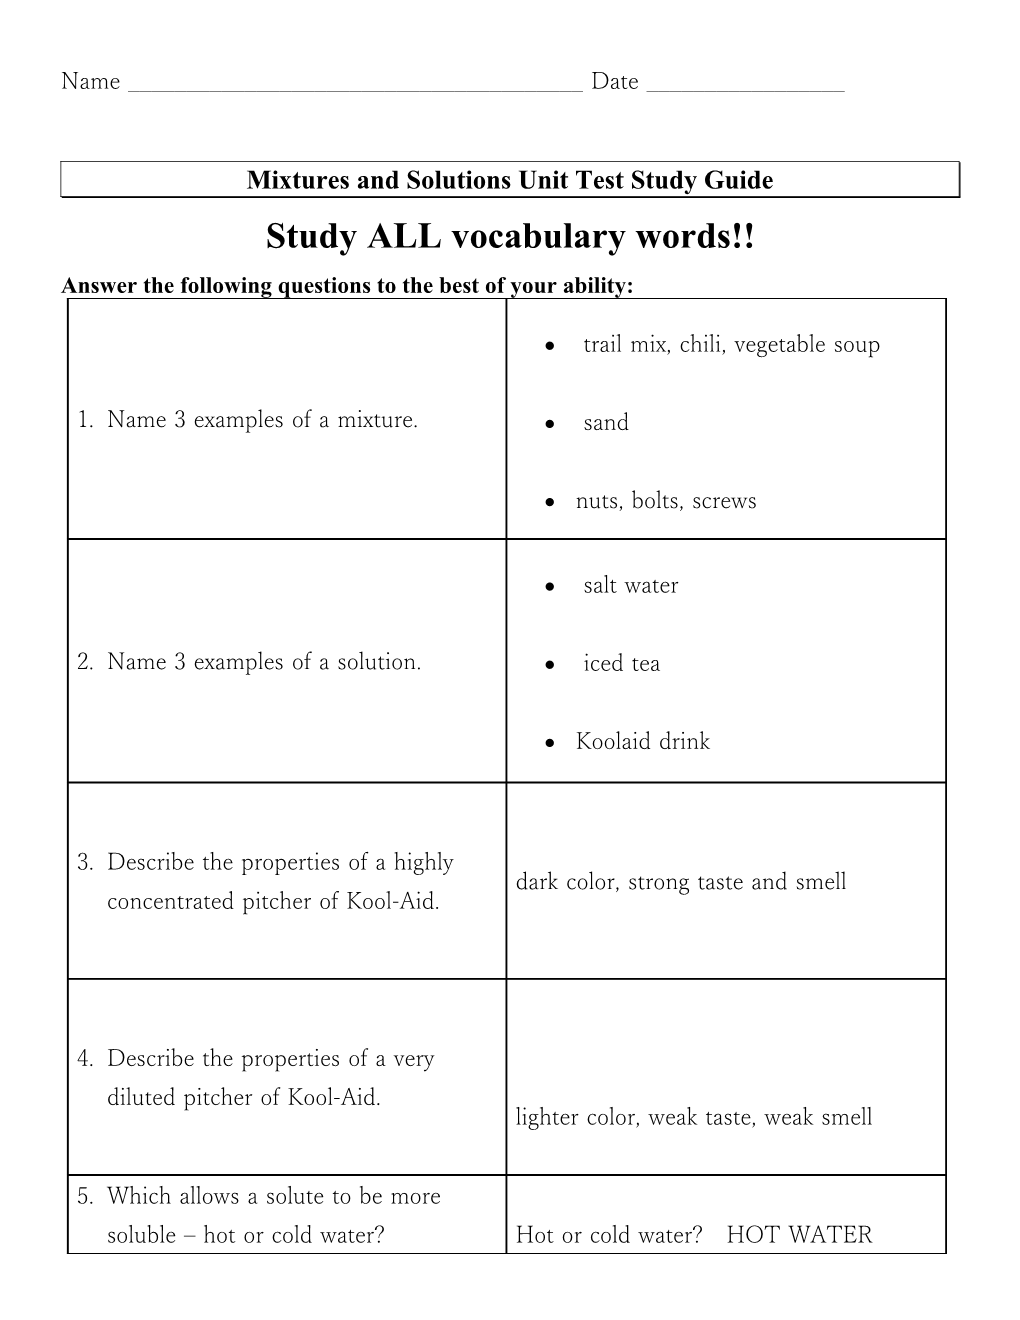 Mixtures and Solutions Unit Test Study Guide